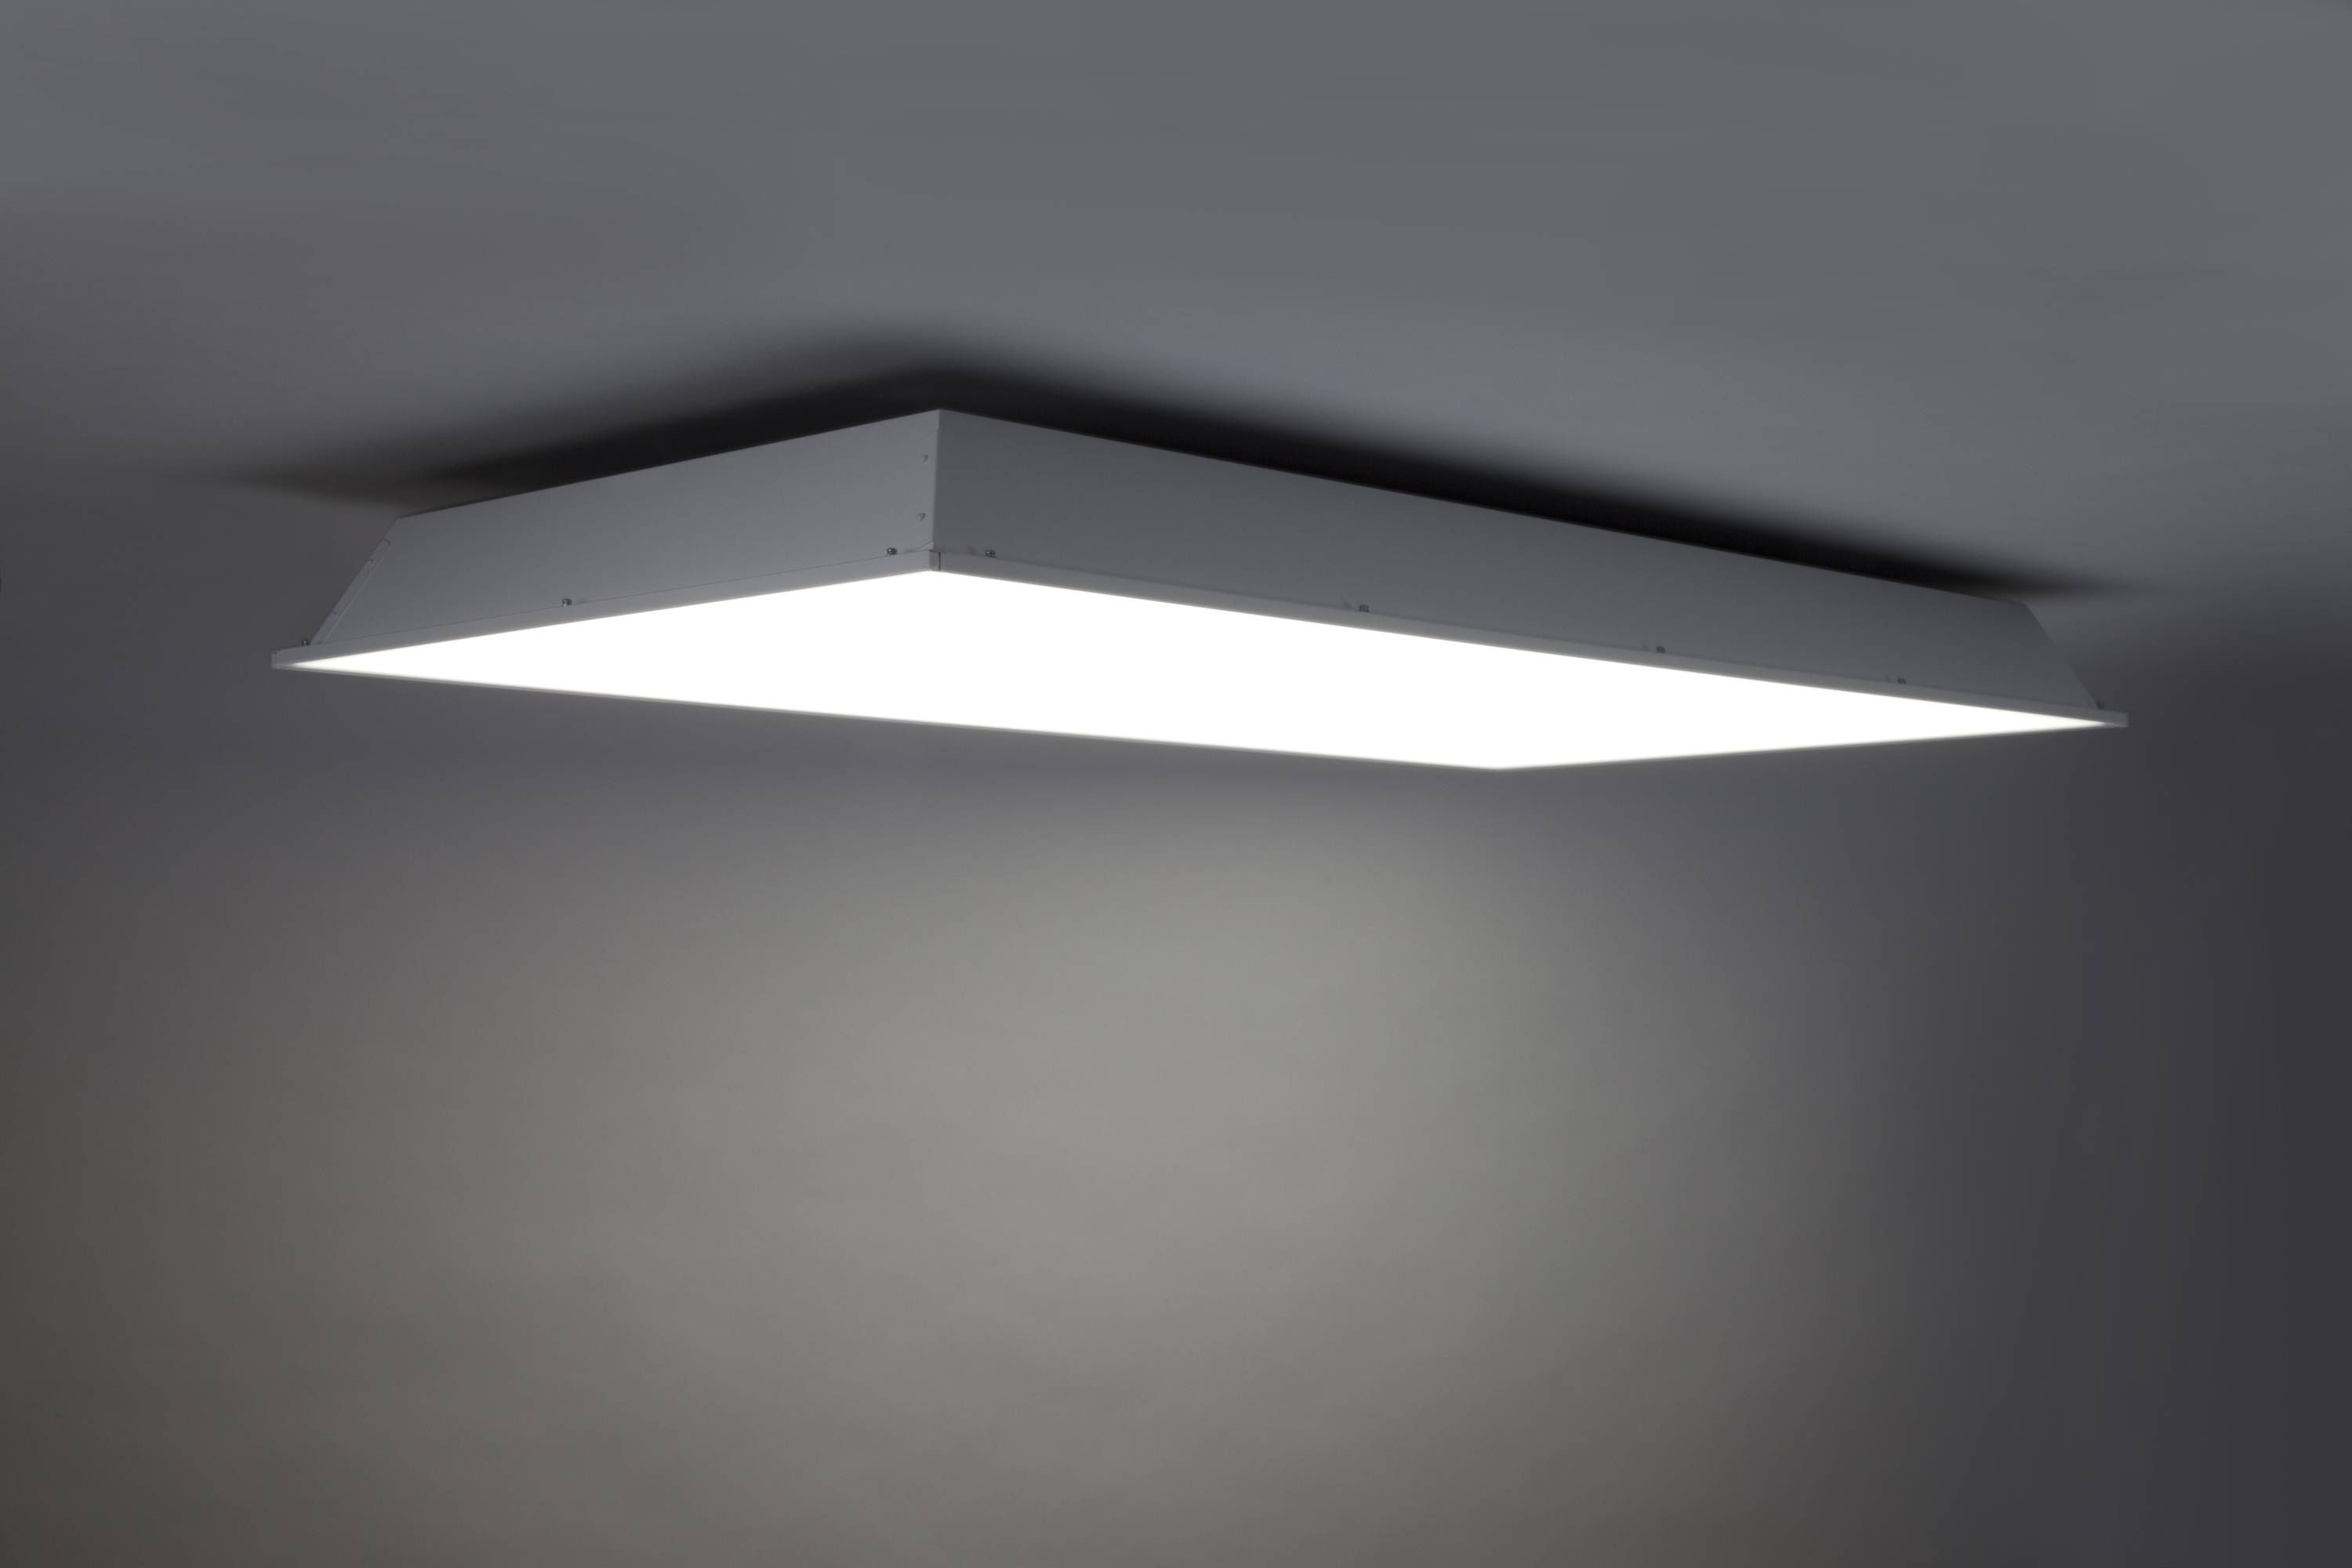 Best Led Ceiling Light Fixtures 85 On Retractable Pendant Light Regarding Retractable Pendant Lights Fixtures (View 13 of 15)